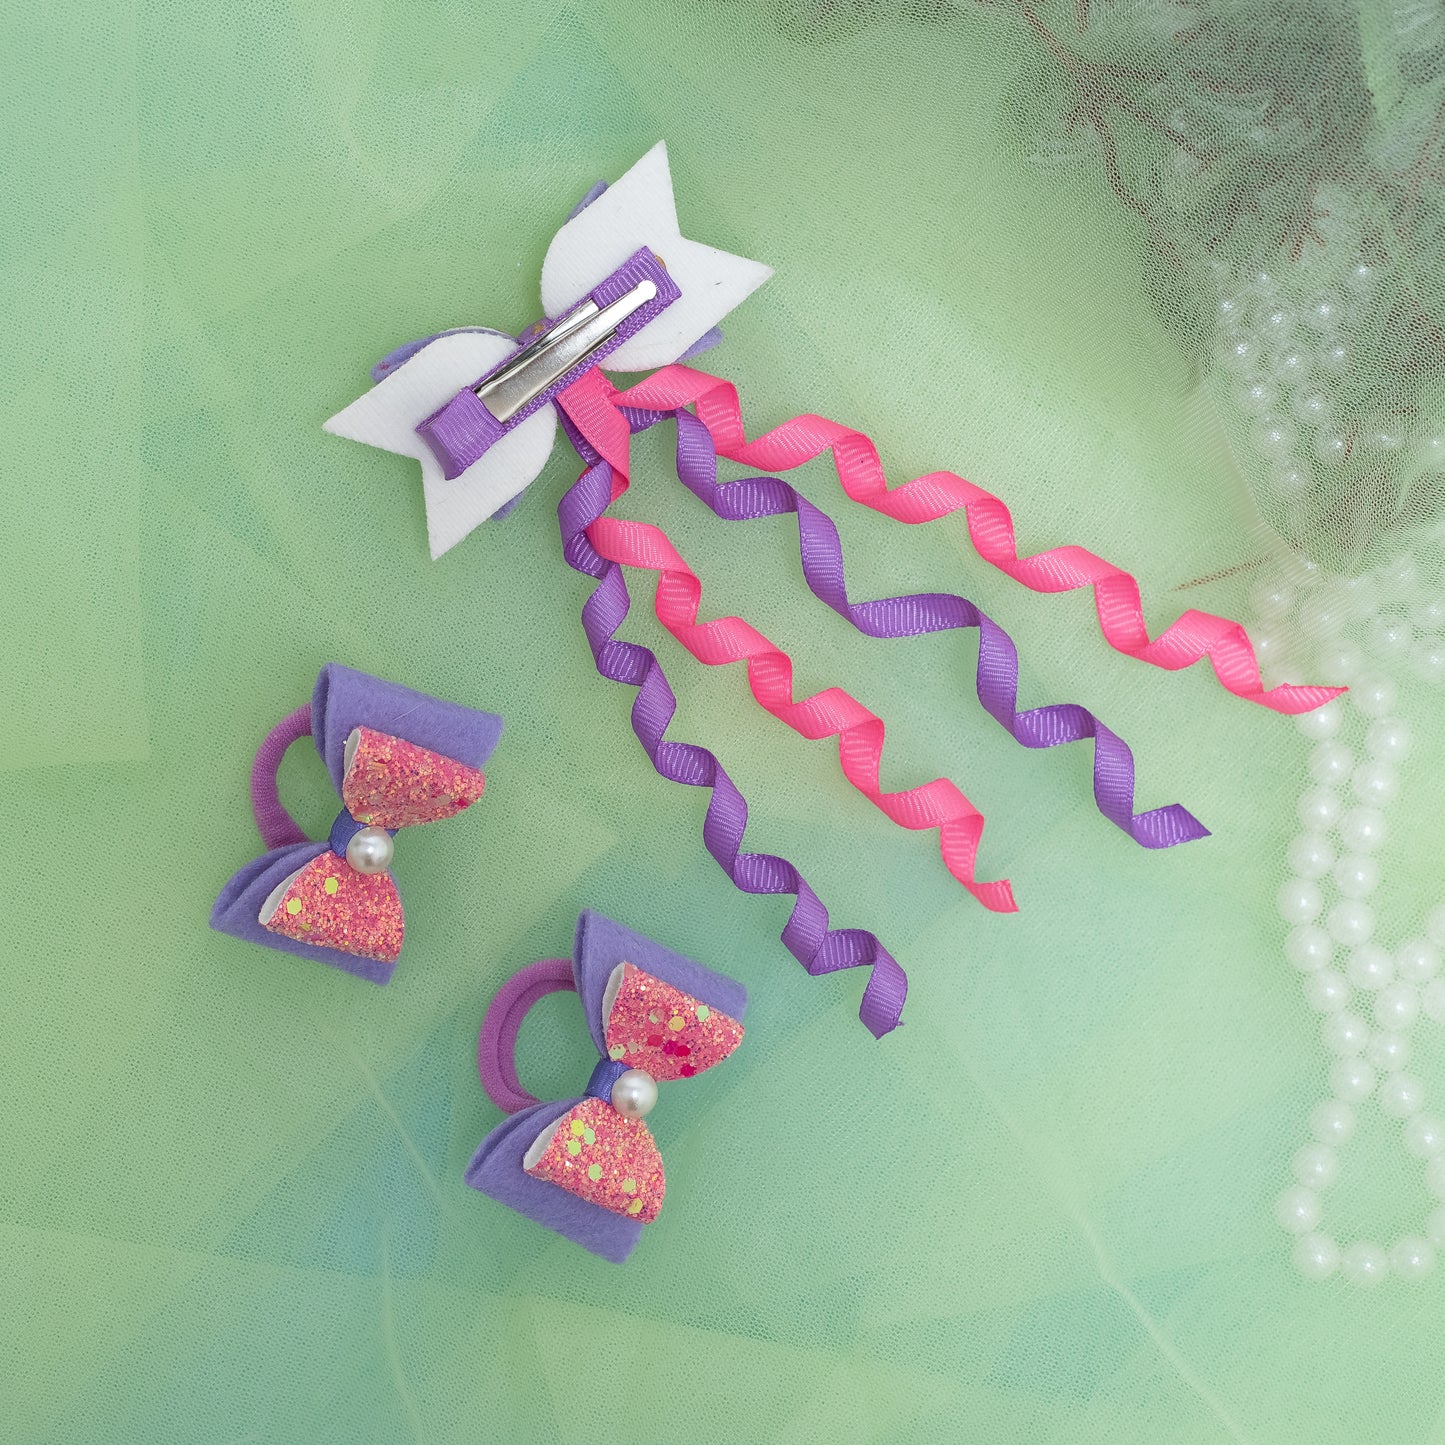 Combo: 1 Dangler Hair-pin and 2 Rubberbands with Fancy Shimmer Bow for Party -  Pink, Purple